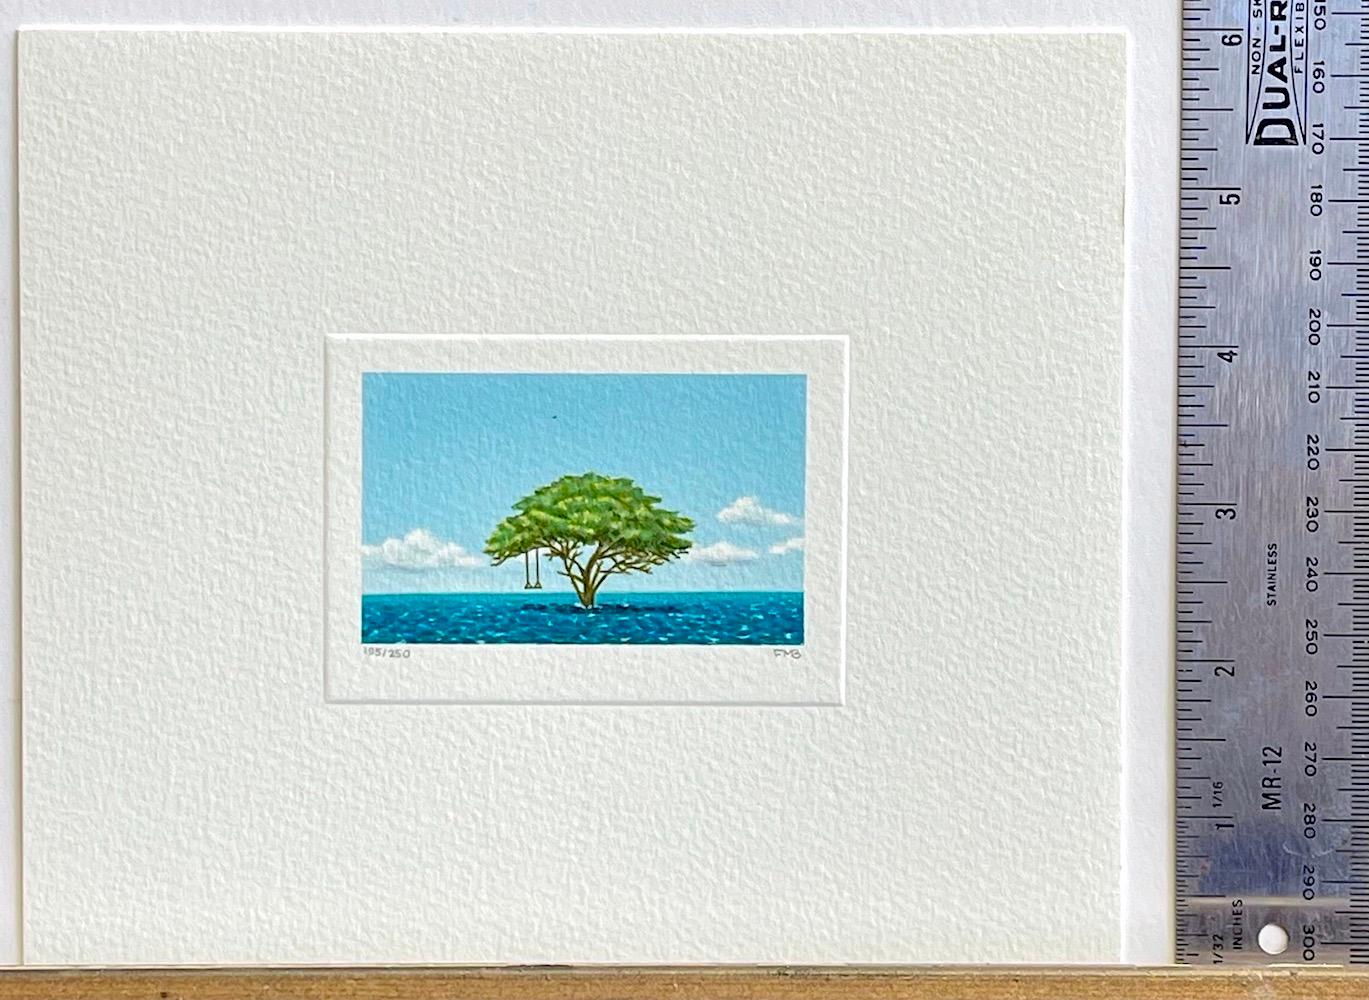 TREE SWING Signed Mini Lithograph, Surreal Waterscape, Clouds, Blue Sky - Surrealist Print by Fanny Brennan